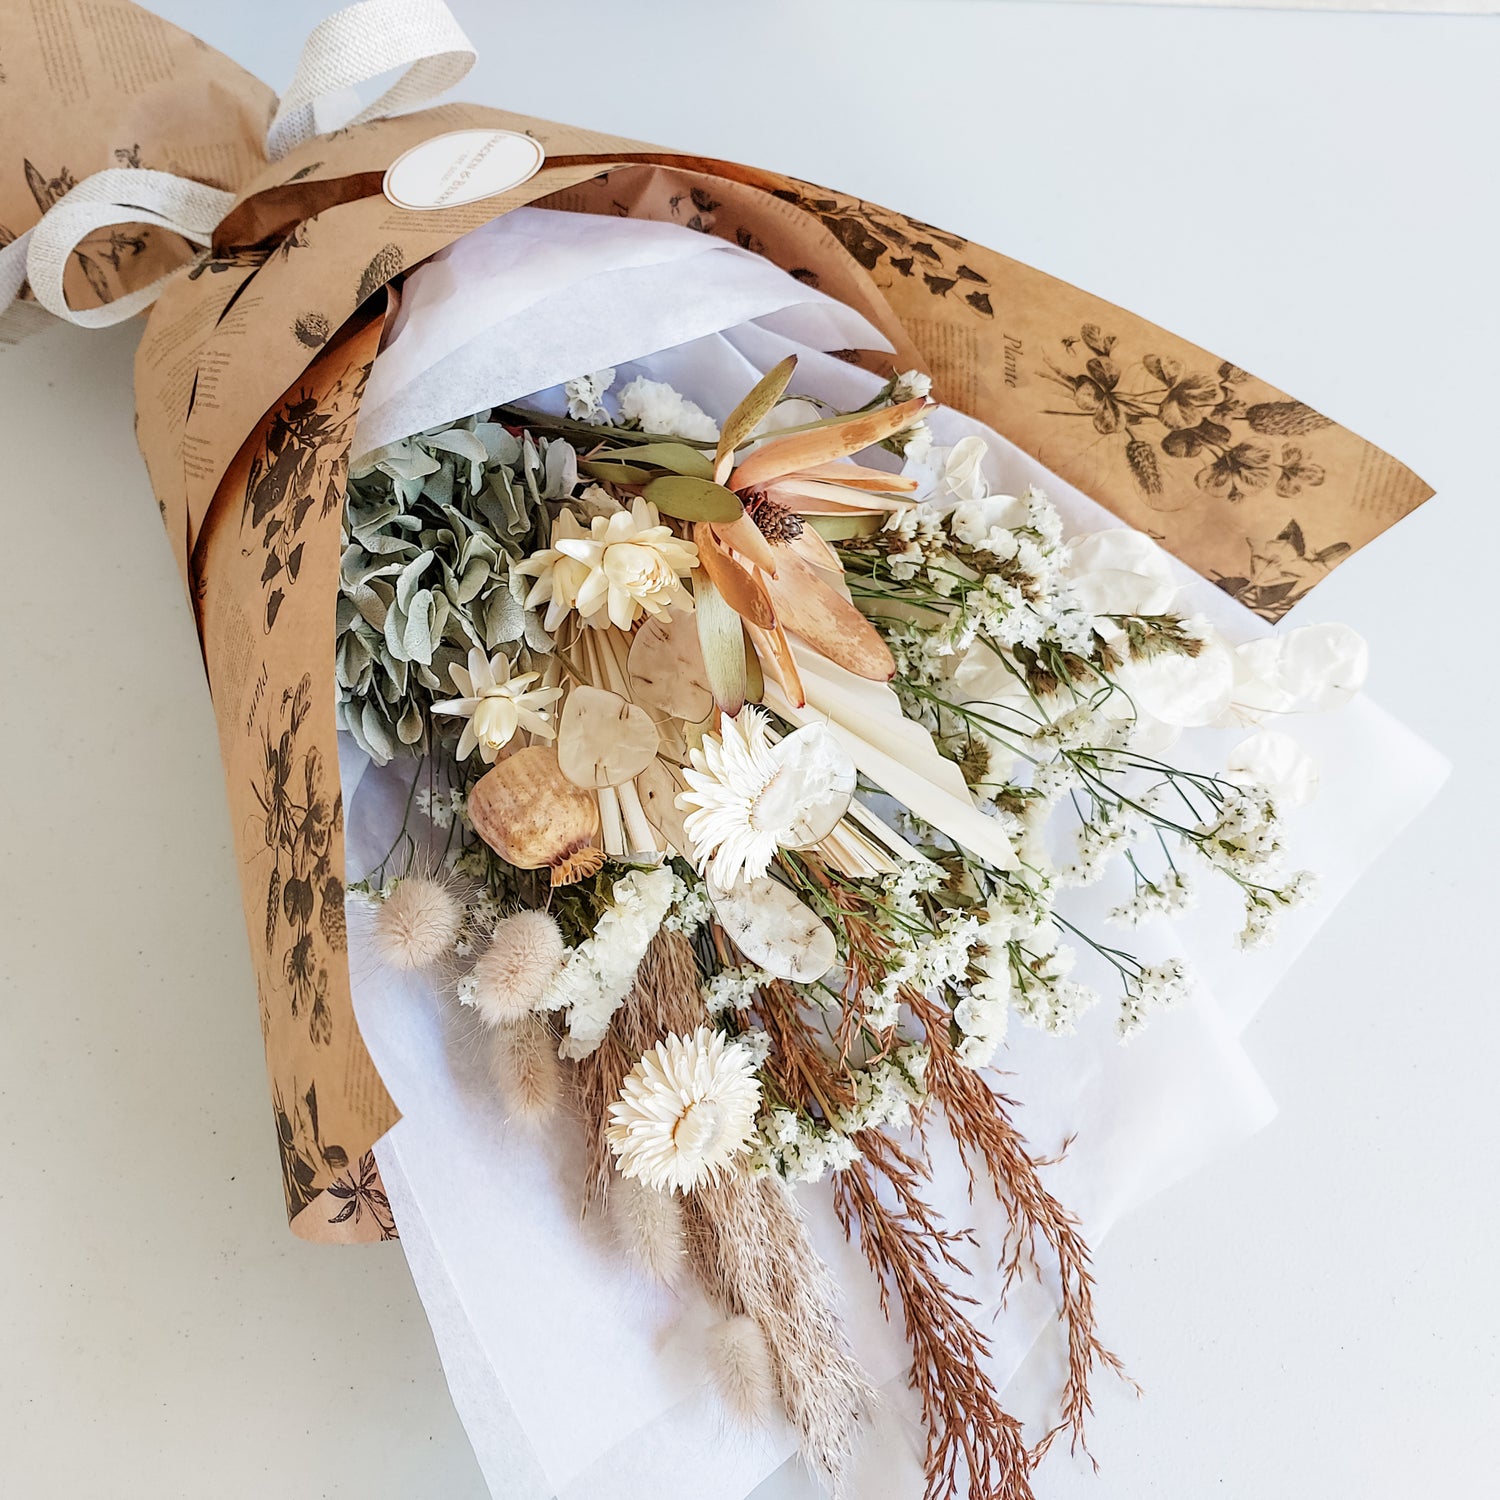 Dried flower bouquet in soft blue and neutral tones wrapped ready for gifting.